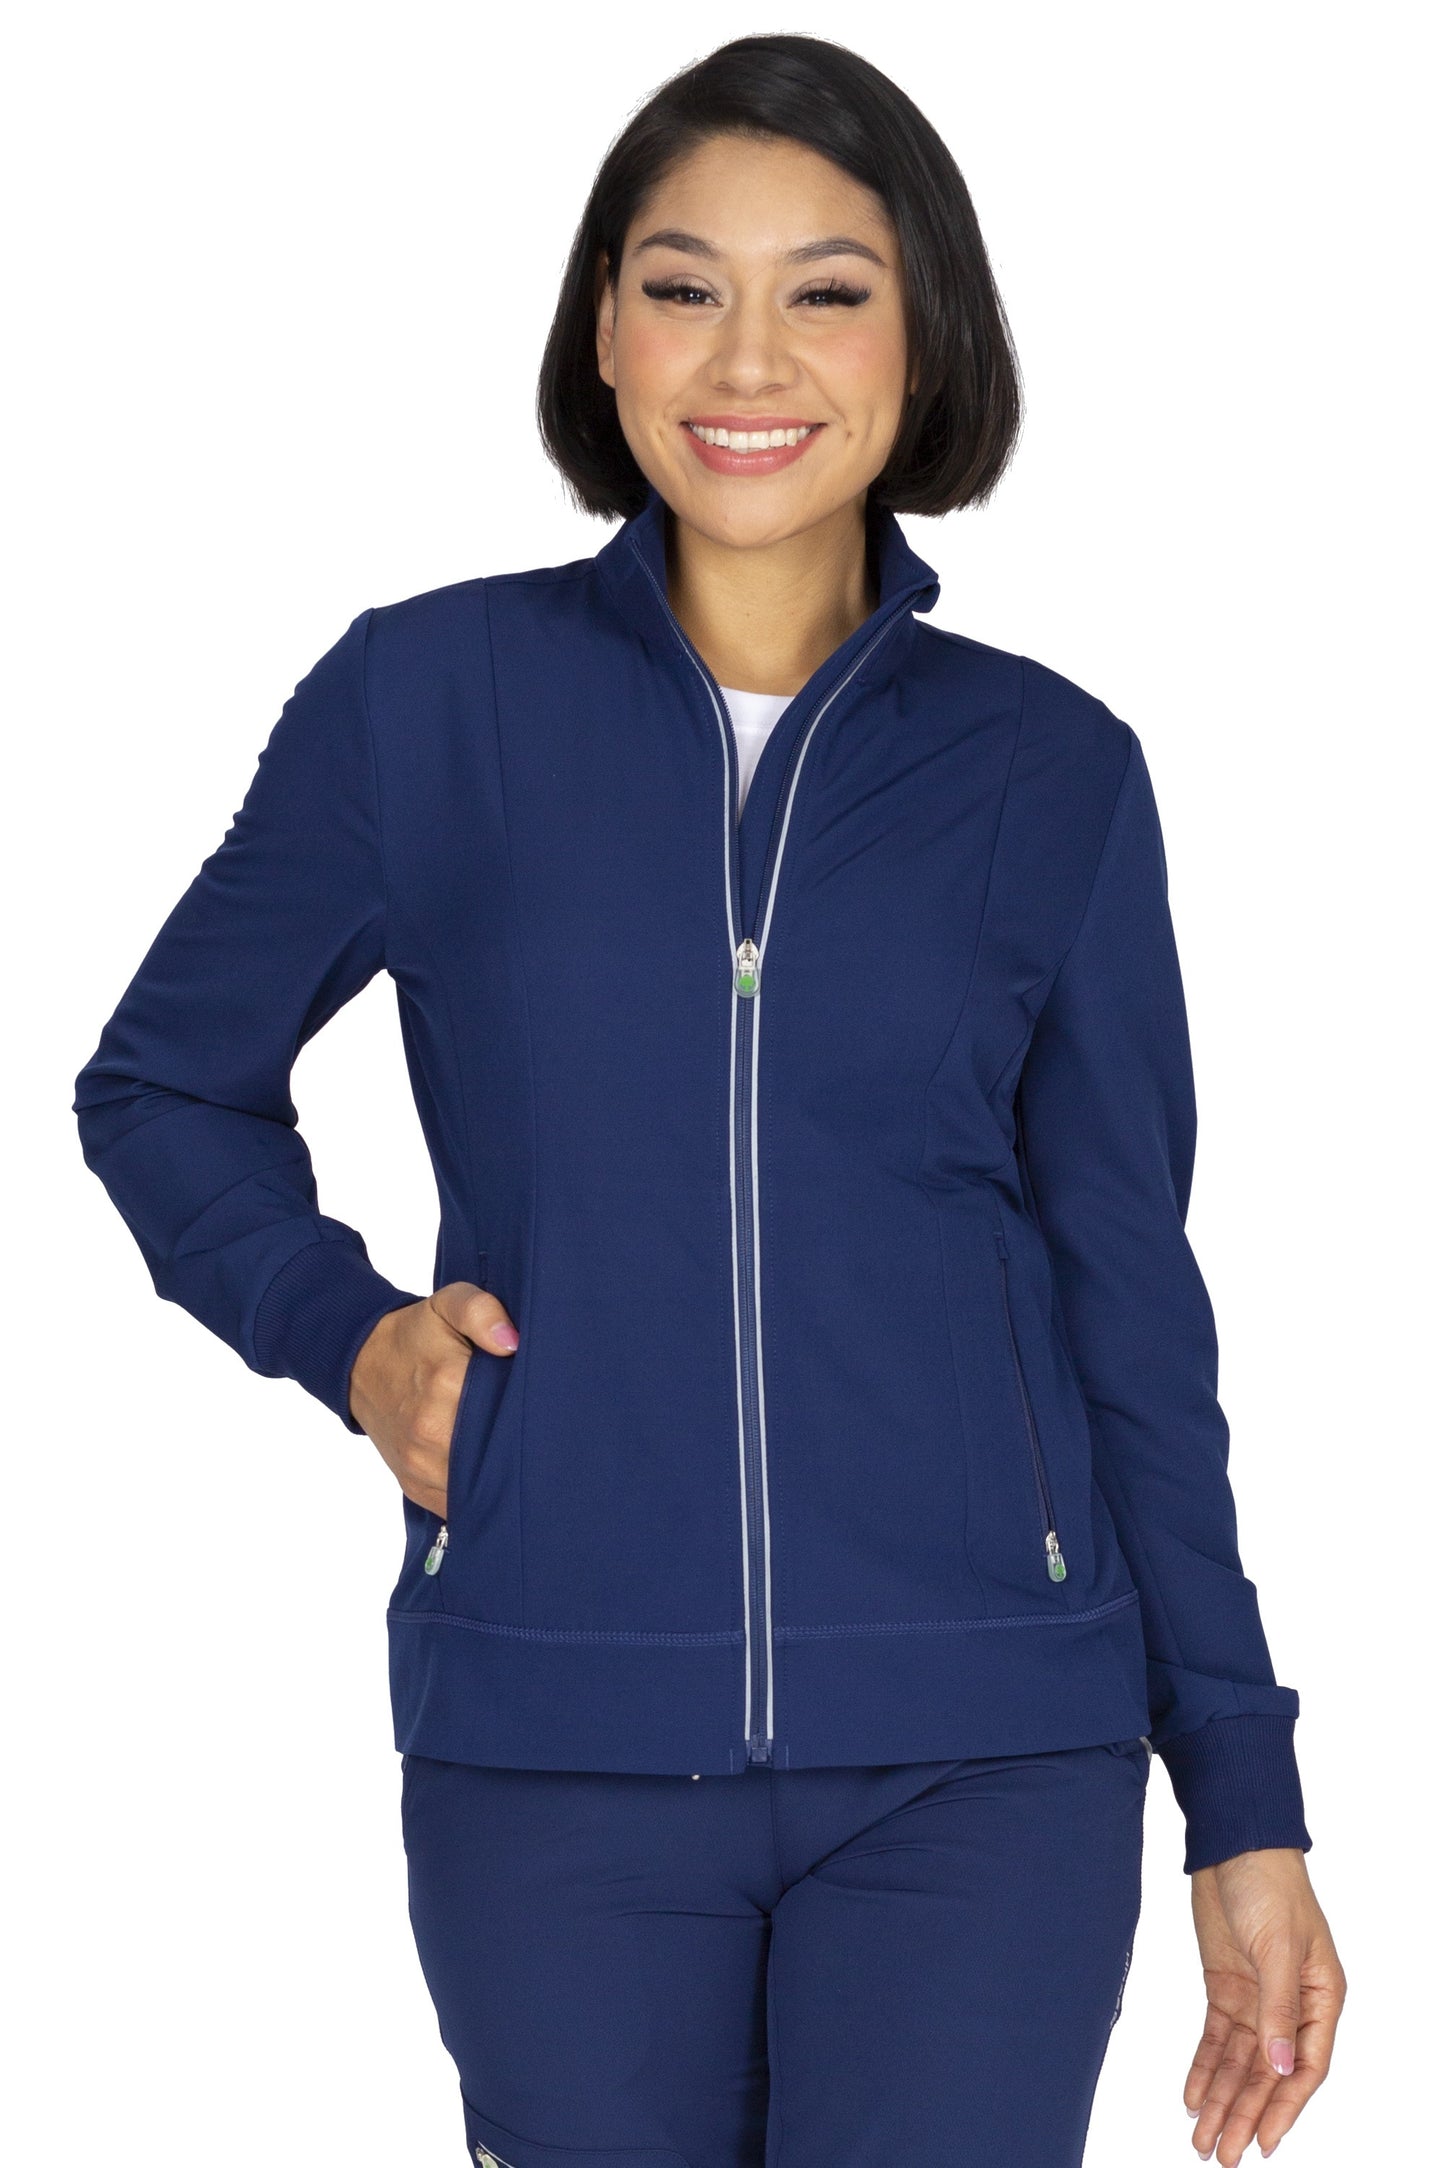 Healing Hands HH360 Carly Scrub Jacket 5067 in Navy Athletic Fit at Parker's Clothing and Shoes.